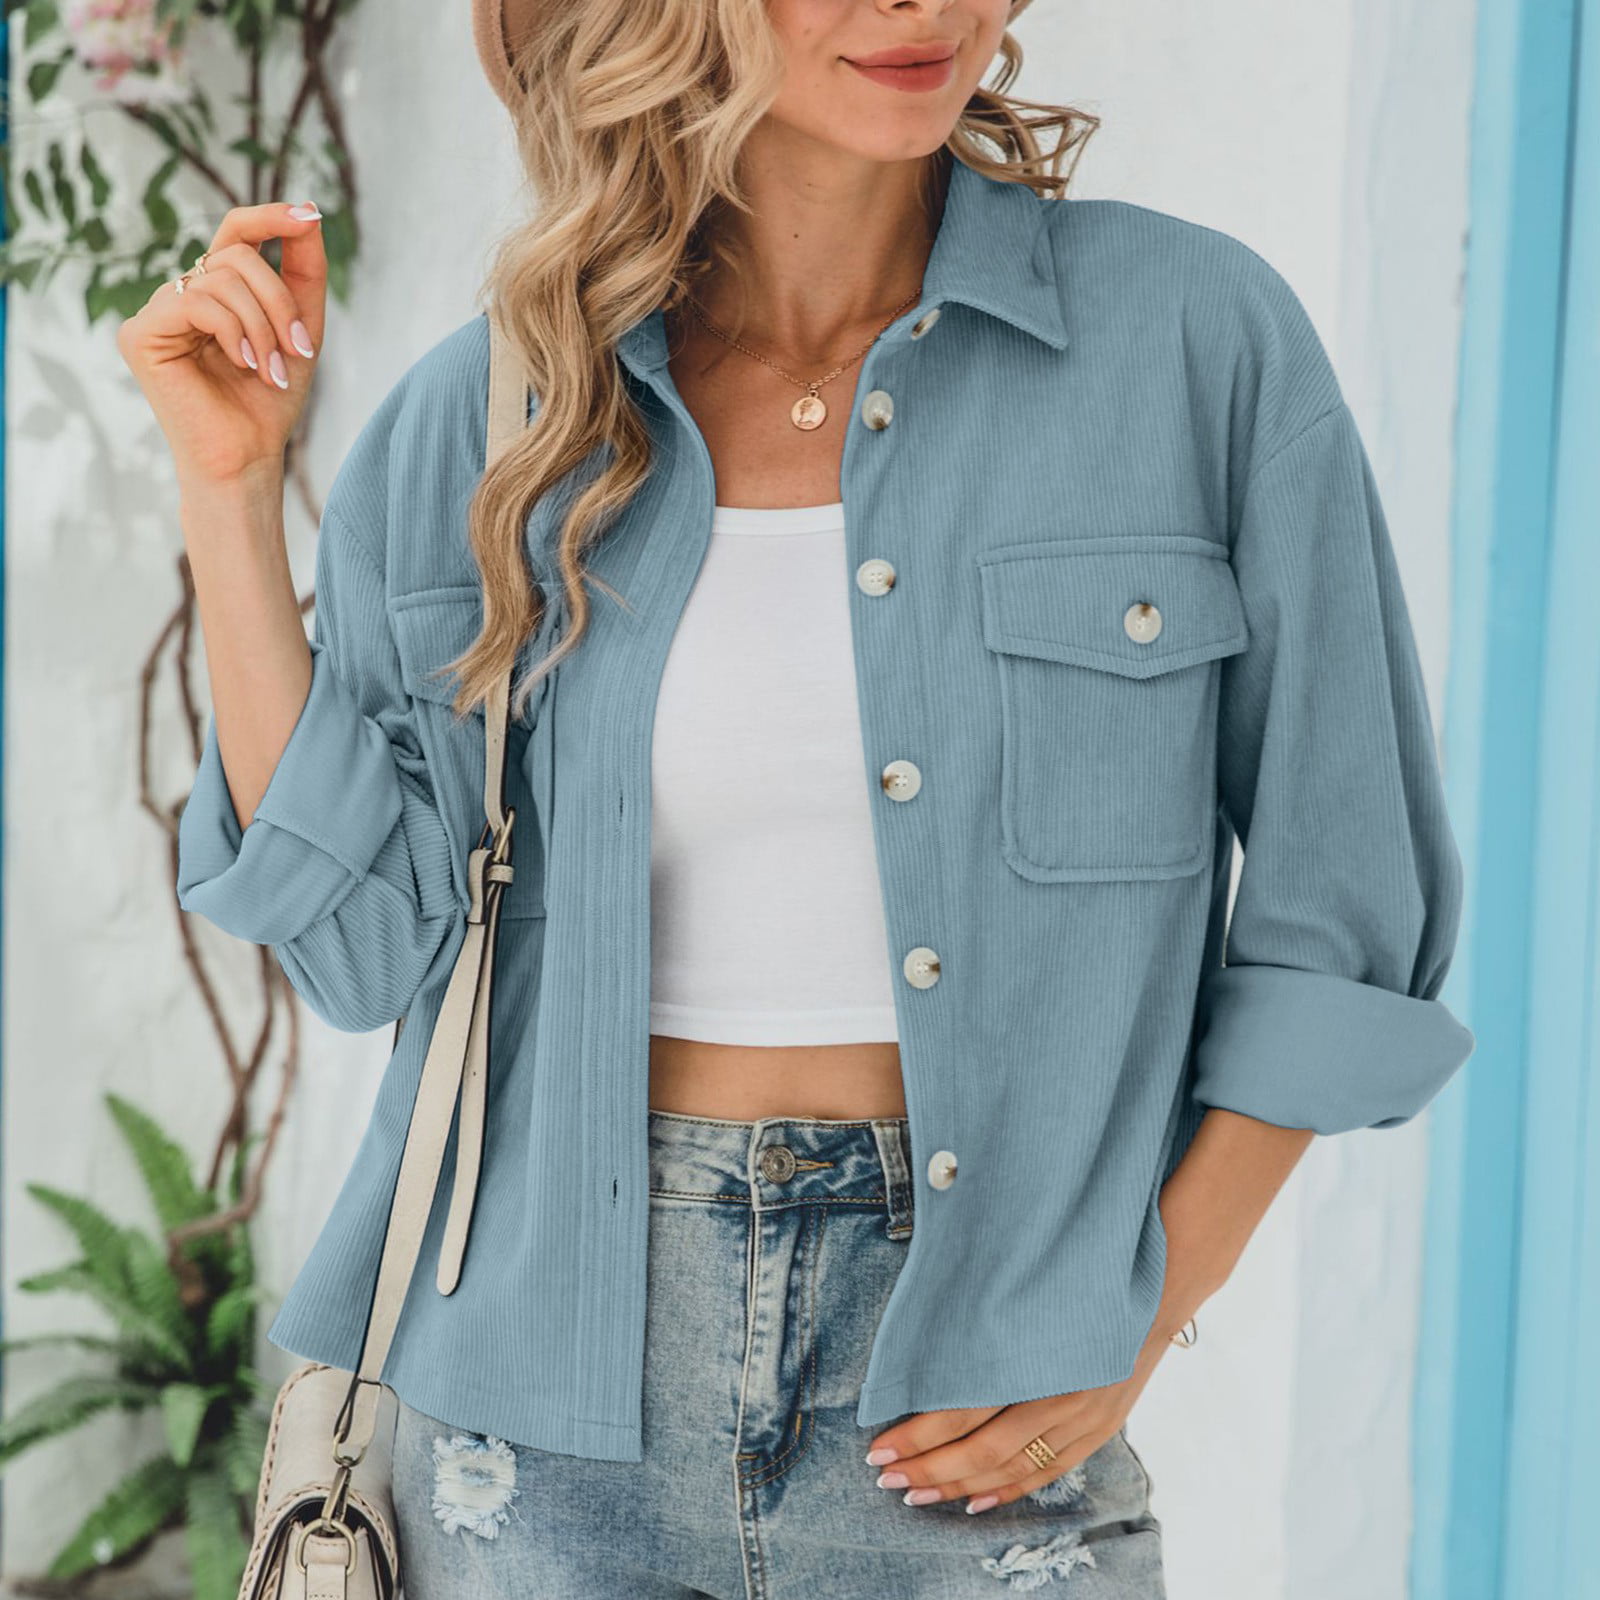 luvamia Denim Jacket for Women Hooded Lightweight Cropped Jean Jacket  Oversized Button Down Shacket Trendy Fashion at  Women's Coats Shop